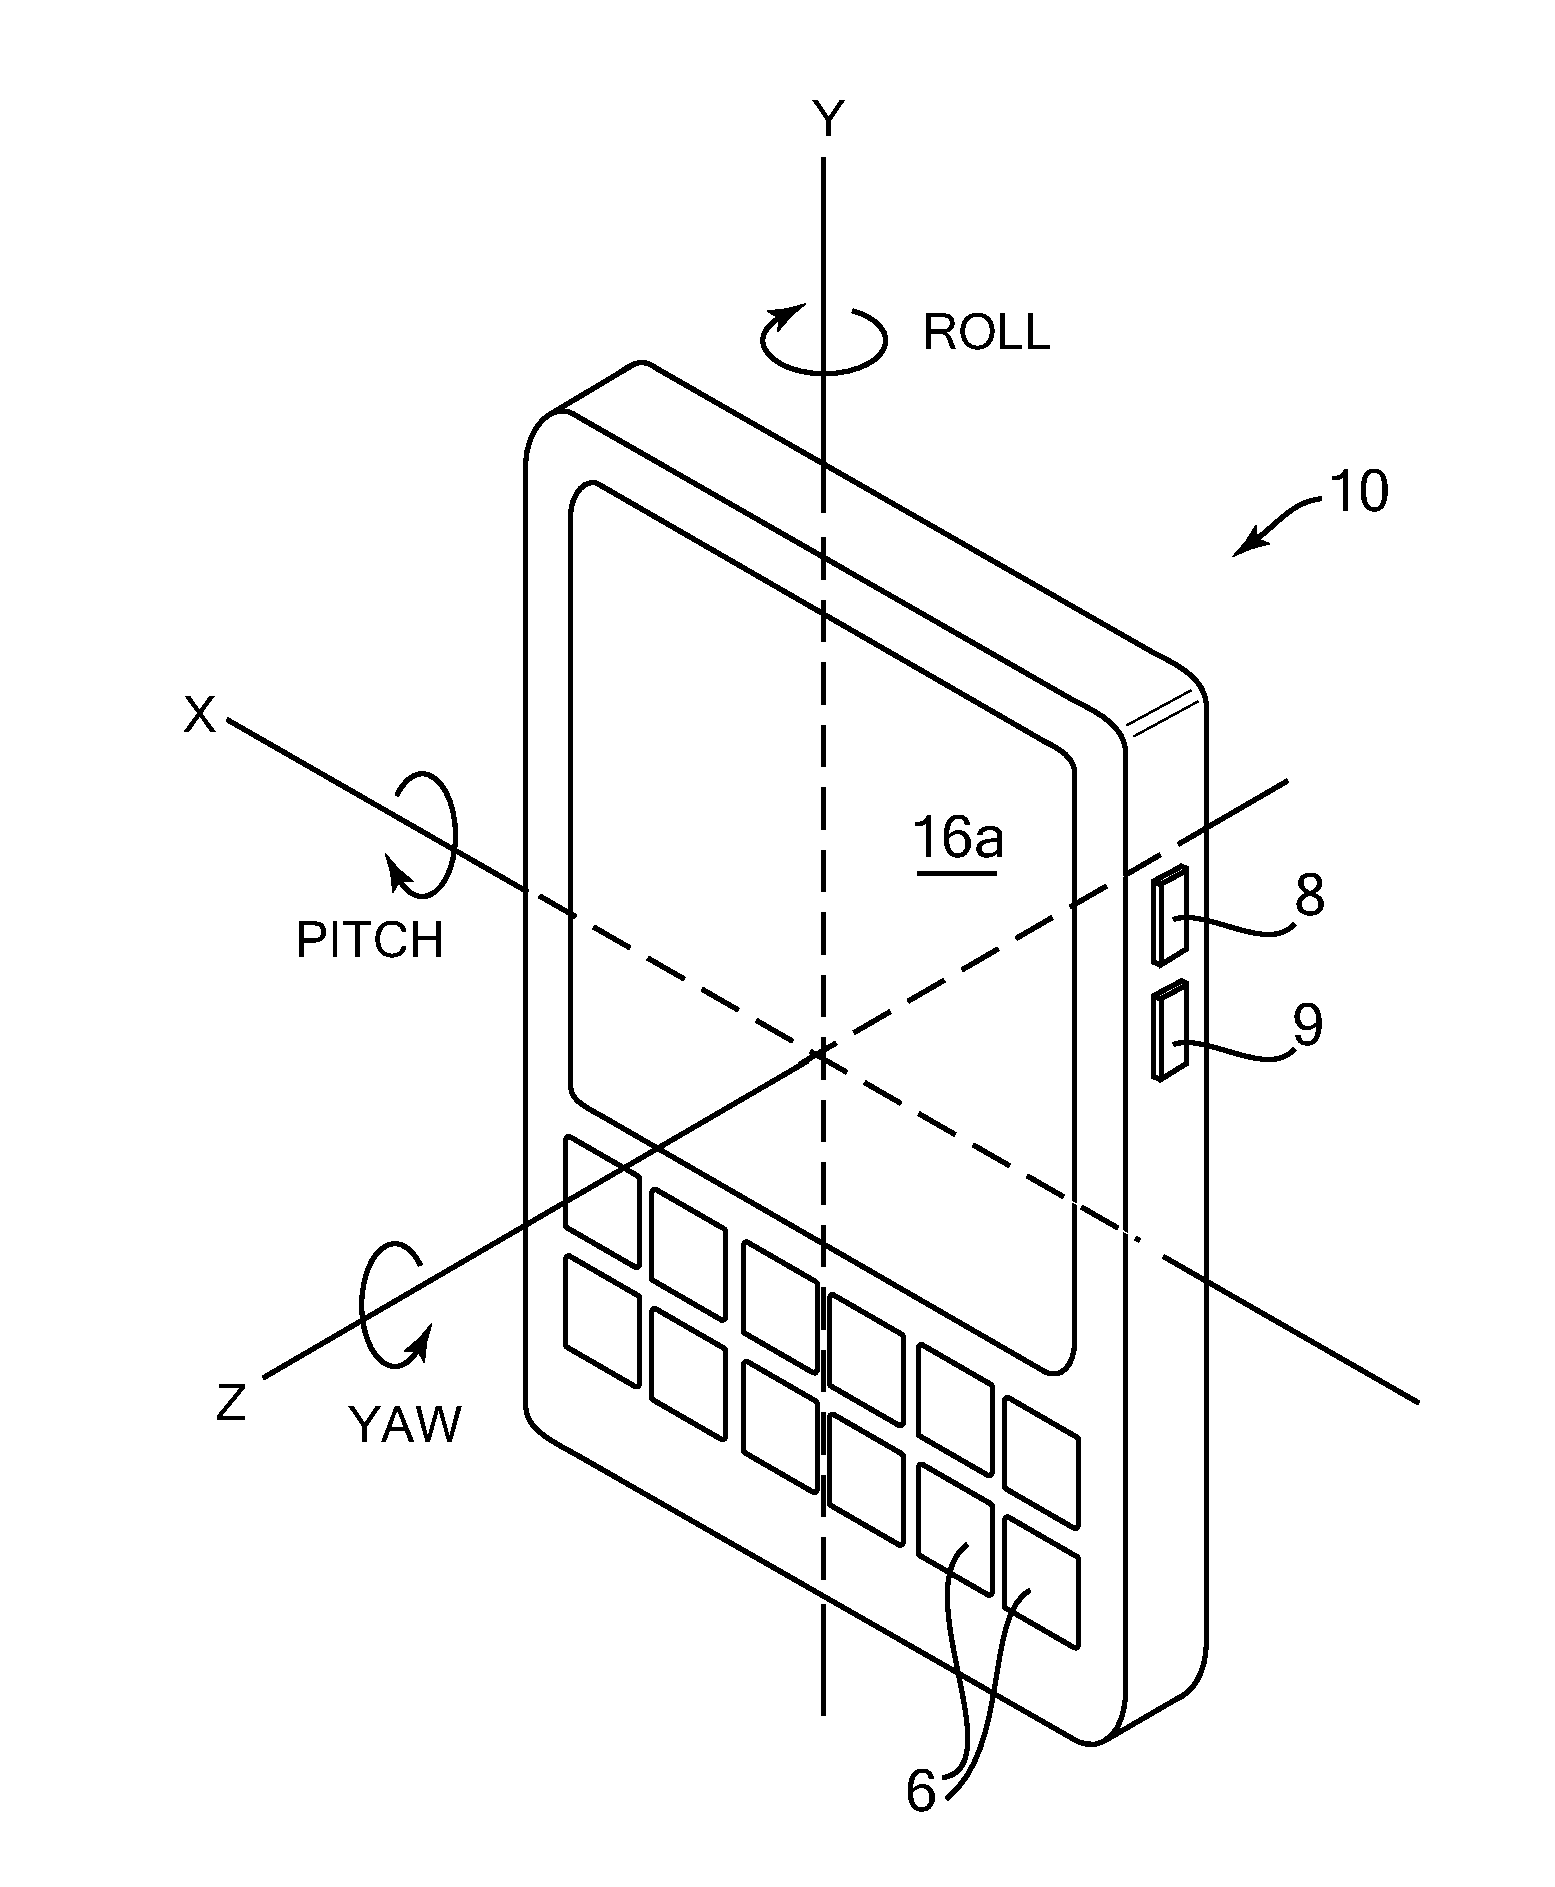 Selectable communication interface configurations for motion sensing device